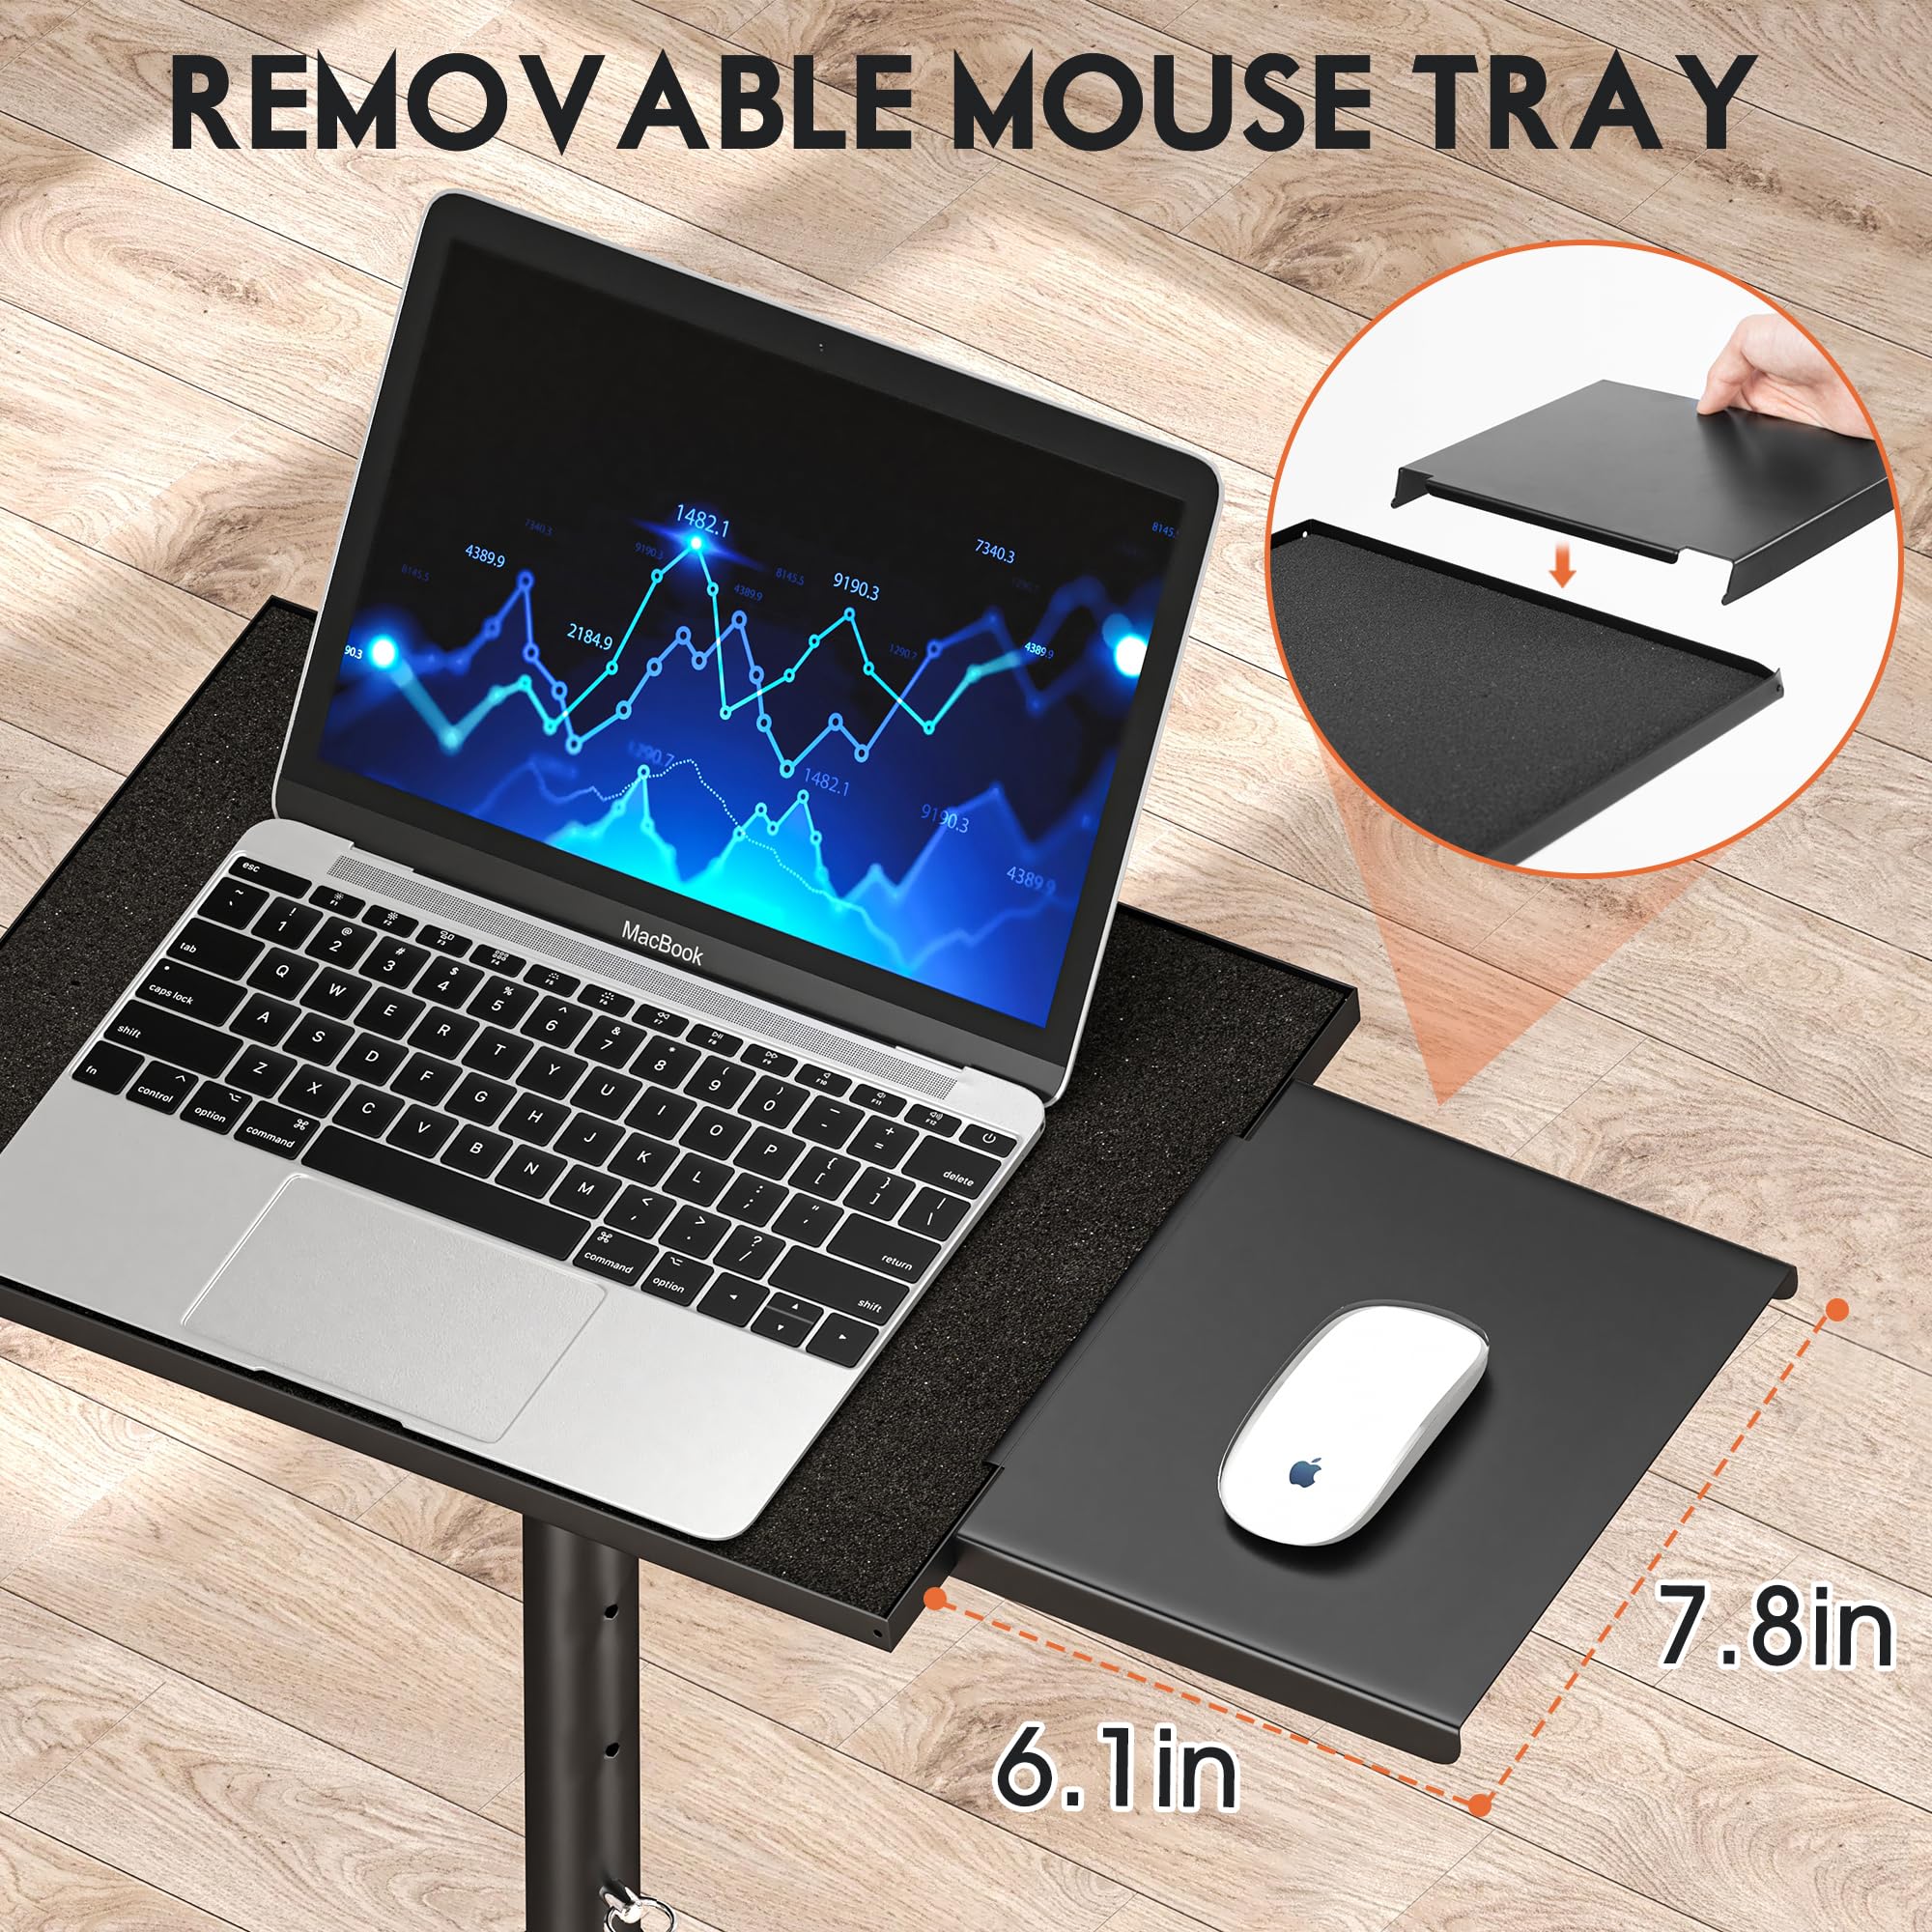 DECOSIS Projector Stand Tripod with Removable Mouse Tray, Adjustable Laptop Tripod Stand from 23.5"-46.5" with Gooseneck Phone H